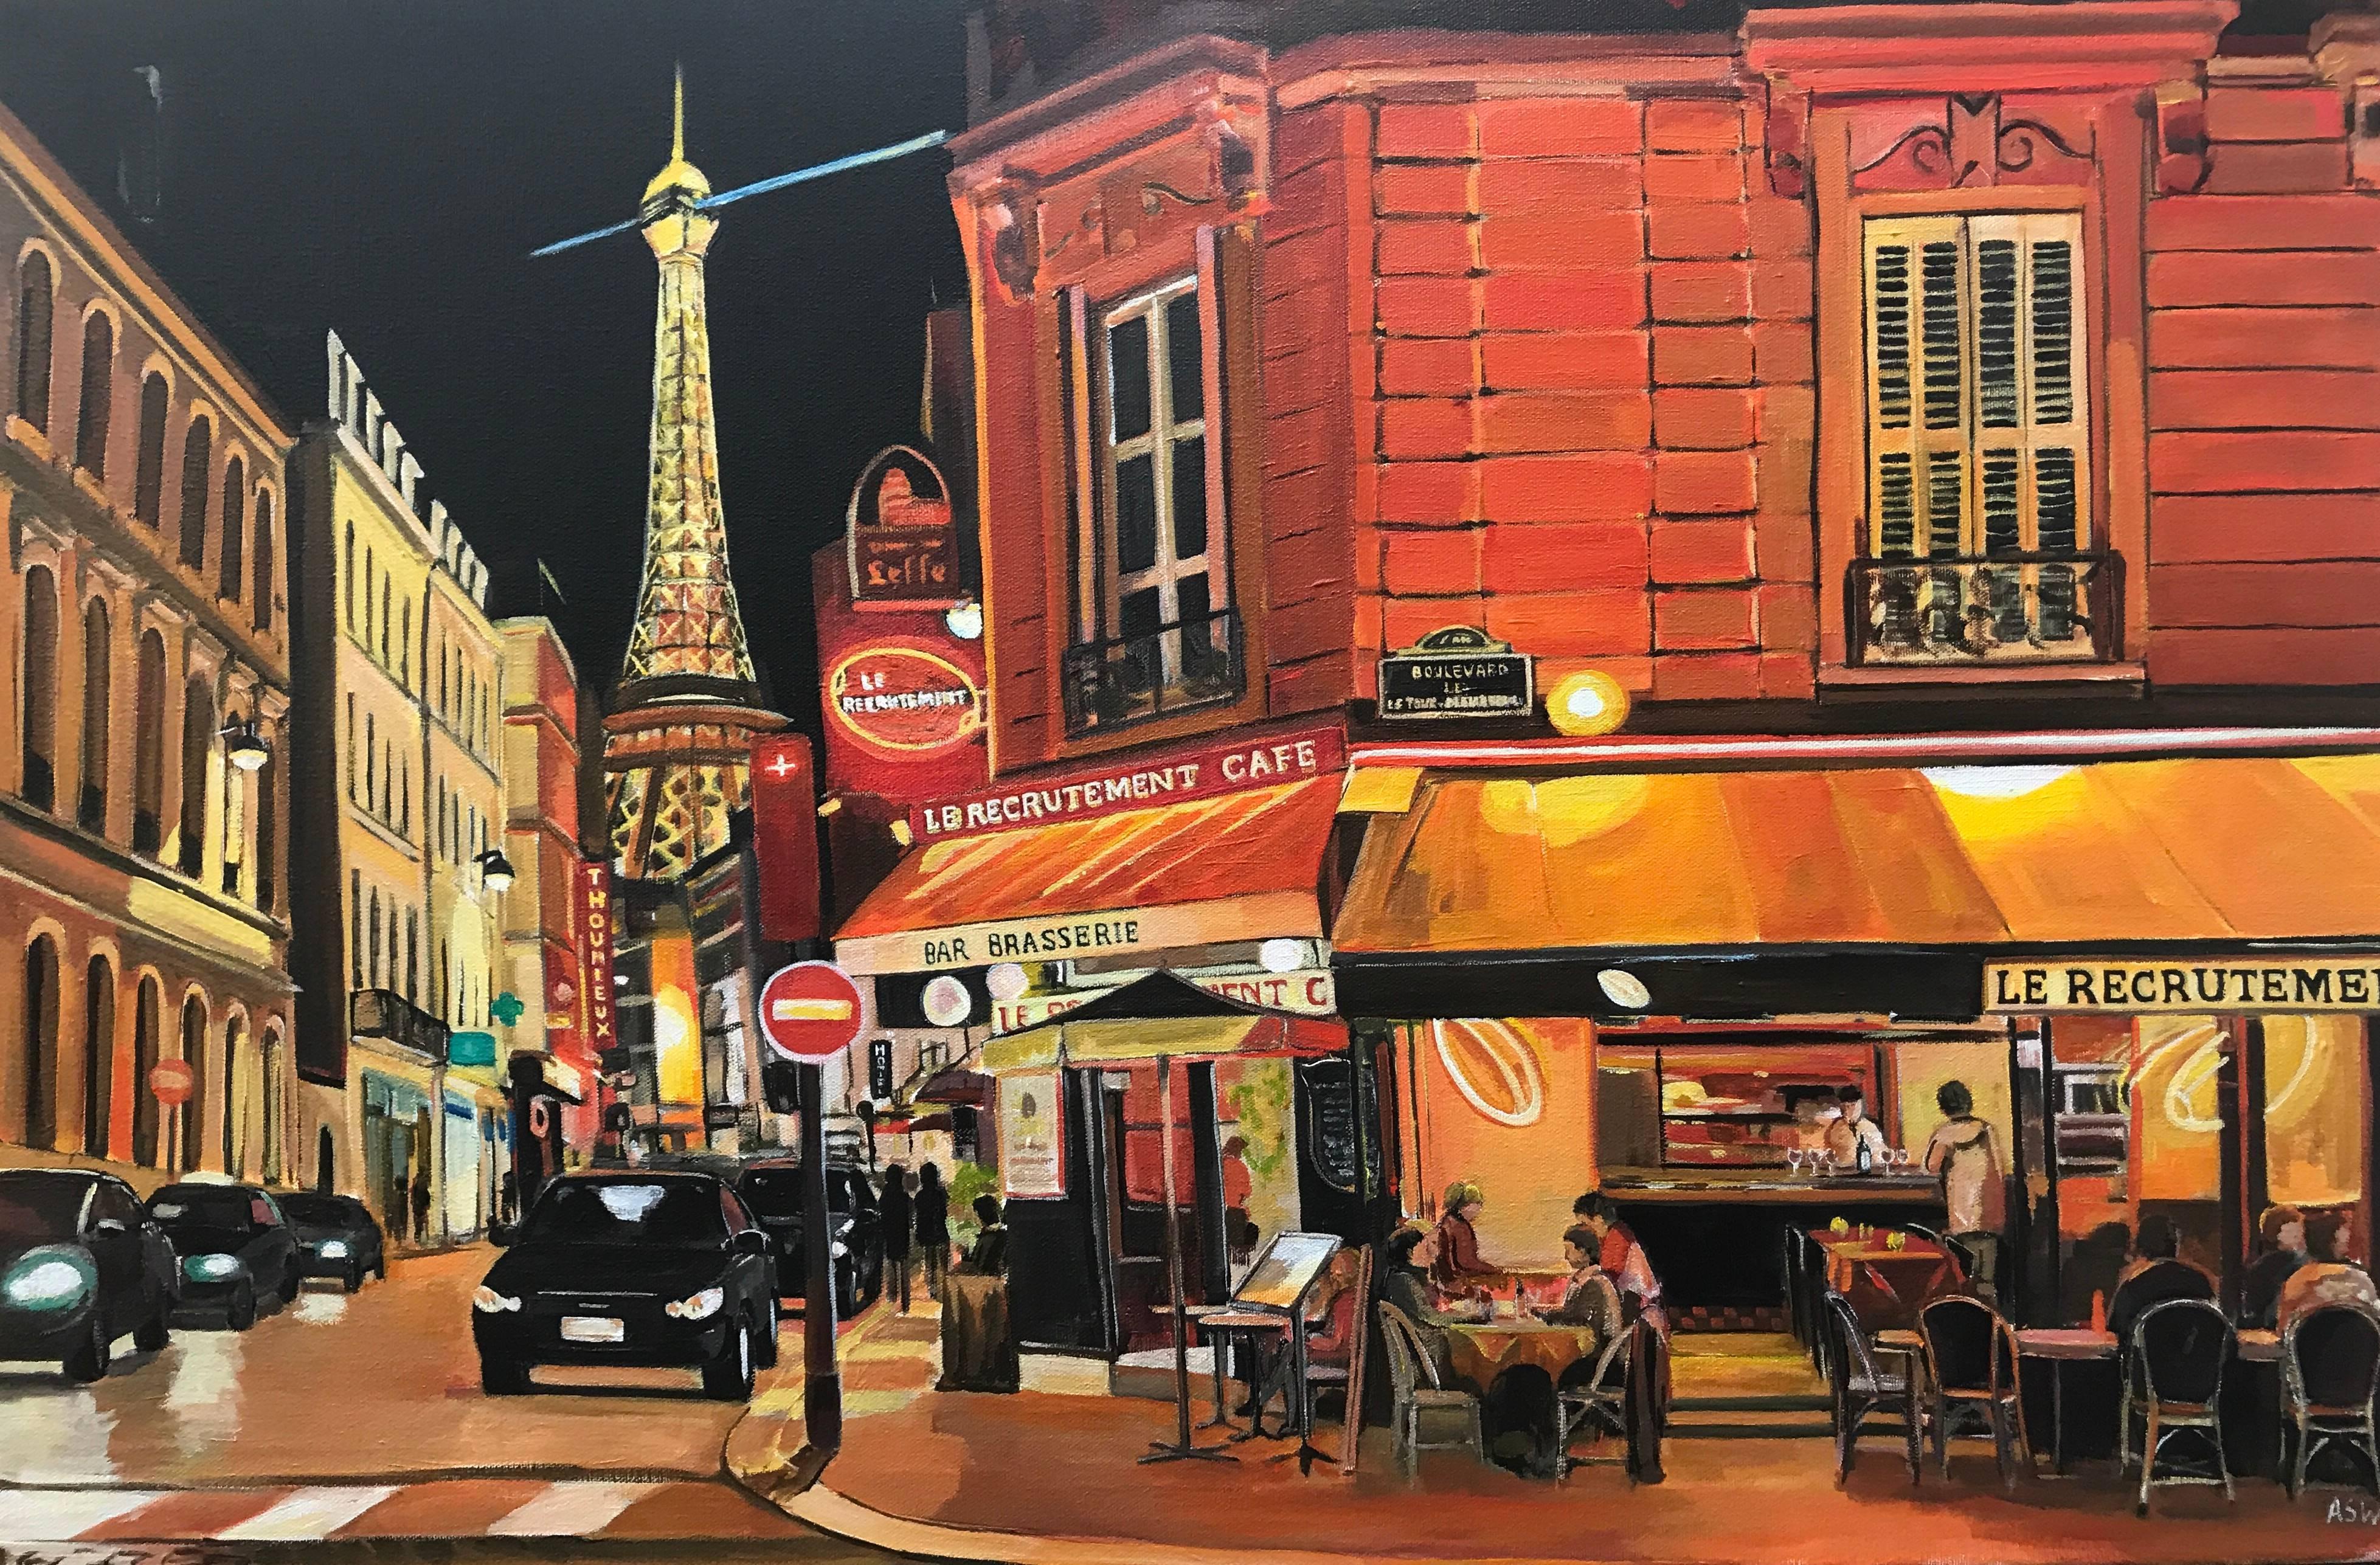 Parisian Café Eiffel Tower Paris France Limited Edition Print by British Artist. A high quality limited edition print of Angela's European Series, incorporating the Eiffel Tower - one of the most iconic structures in Europe. The Parisian Café is Le